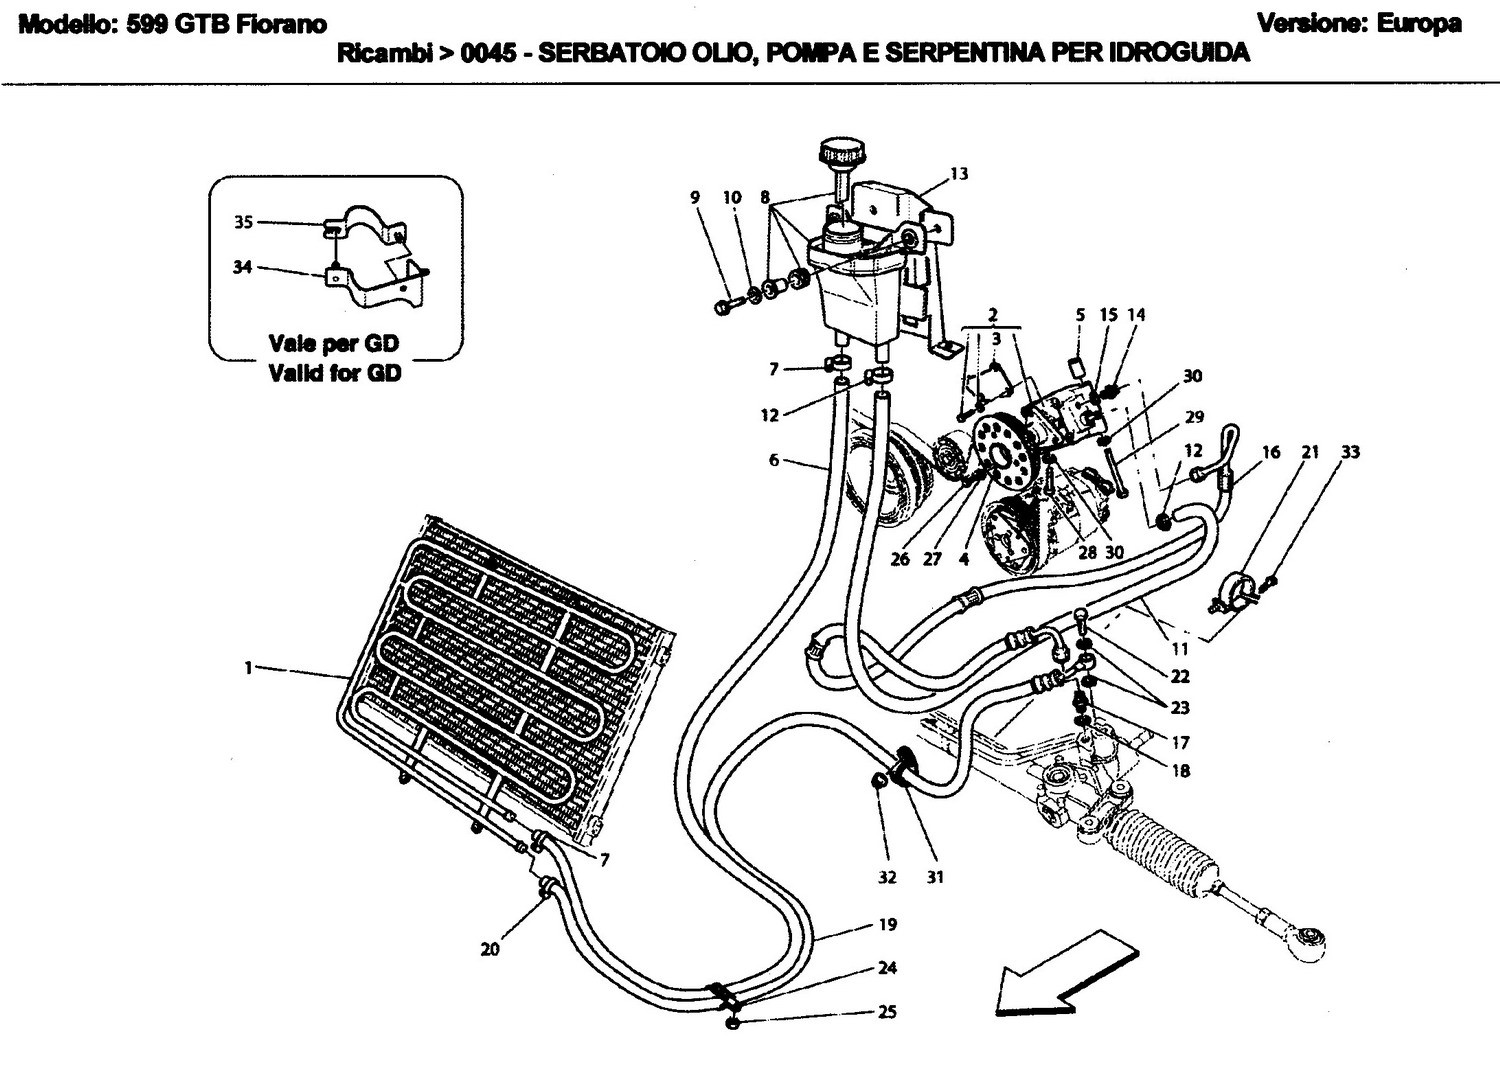 OIL TANK, PUMP AND SERPENTINE FOR SERVOSTEERING